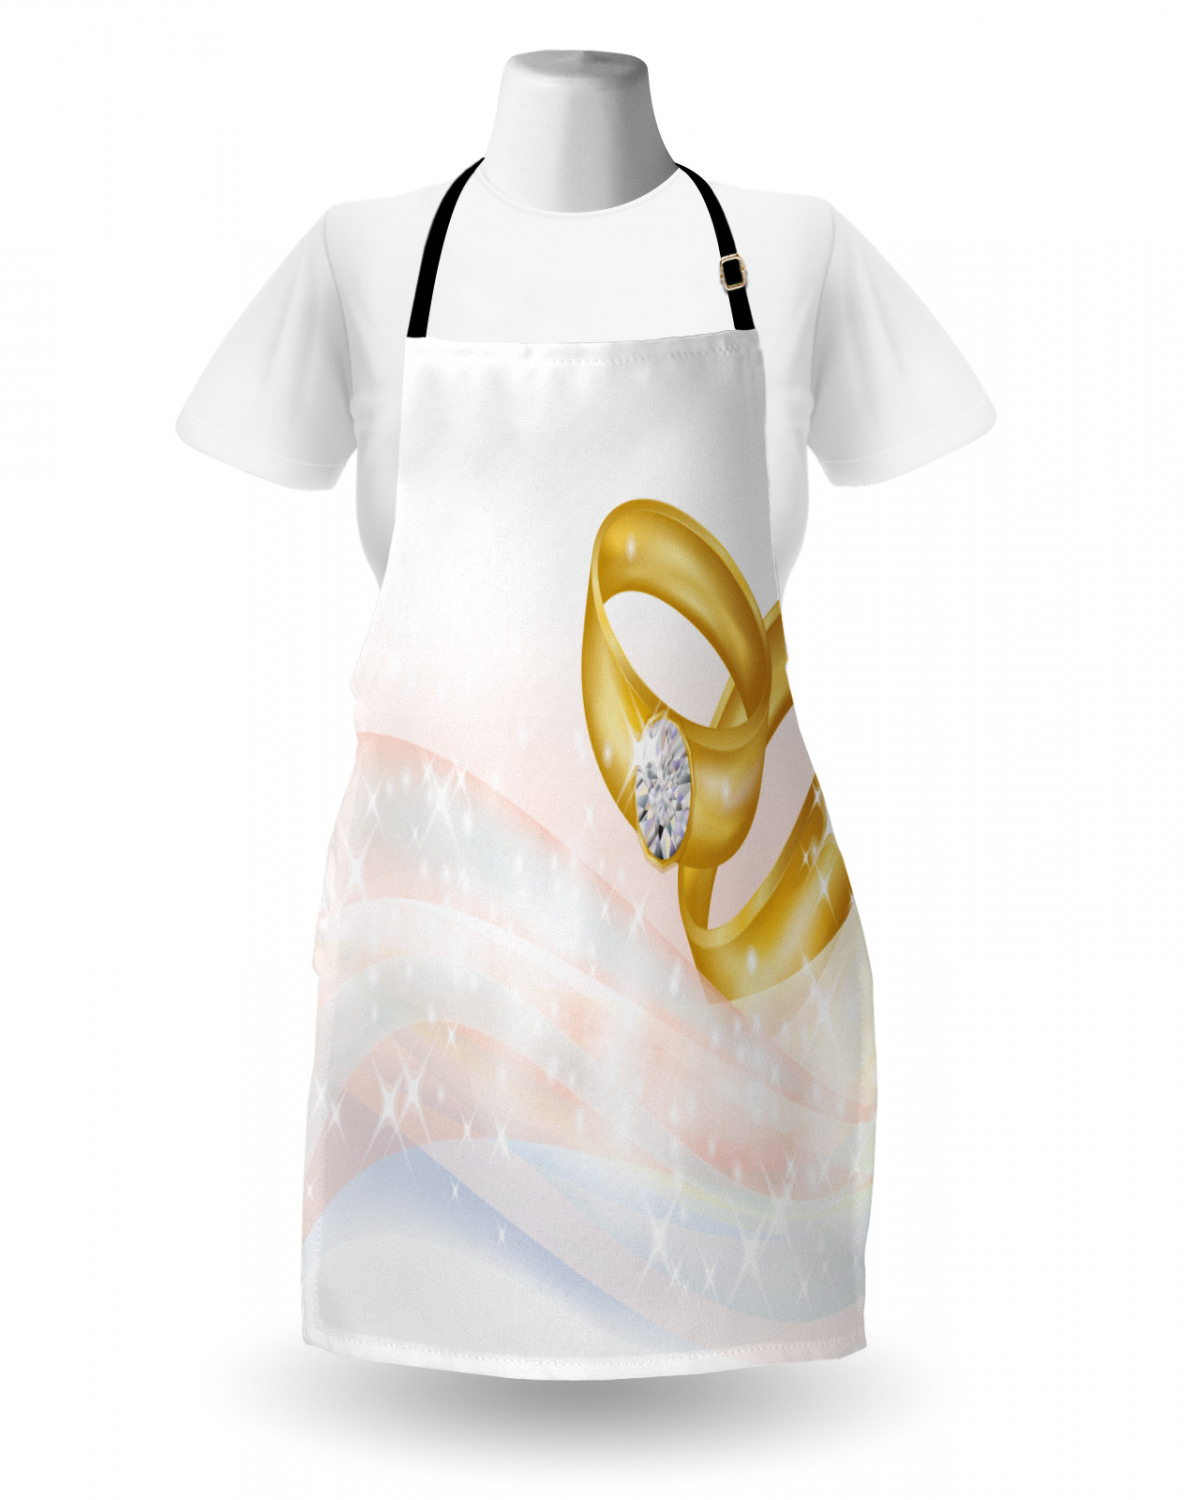 Everyday Use Adult Baking Apron Bride to Be Adjustable Neck Strap Bib Apron w 2 pockets Washable Reusable Great for Cooking